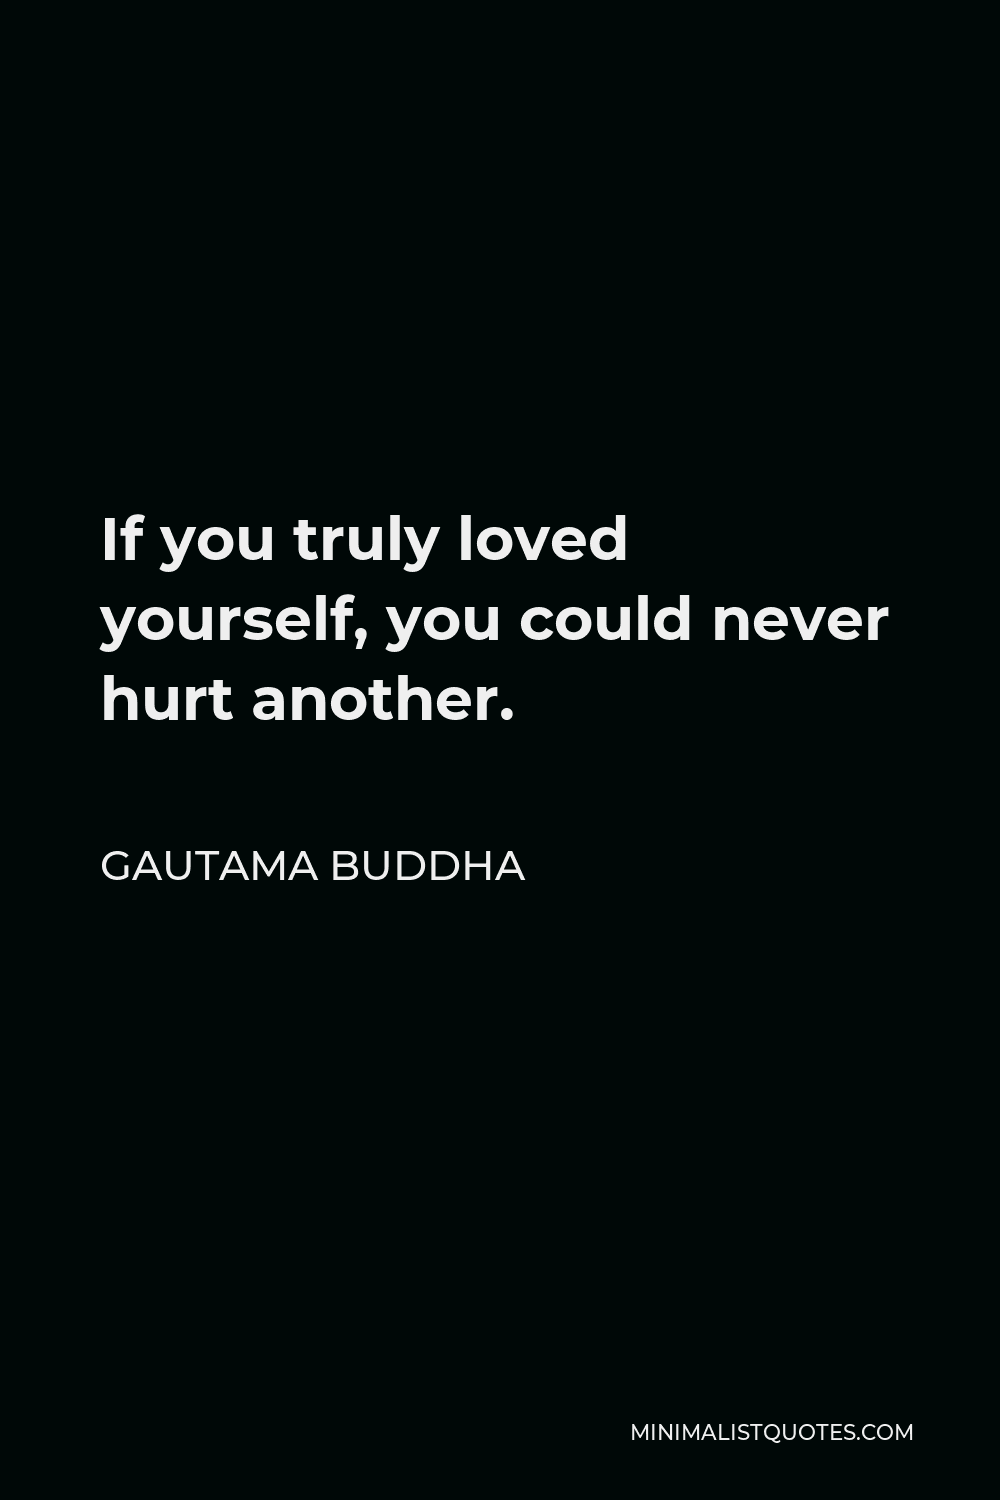 Gautama Buddha Quote If You Truly Loved Yourself You Could Never Hurt Another